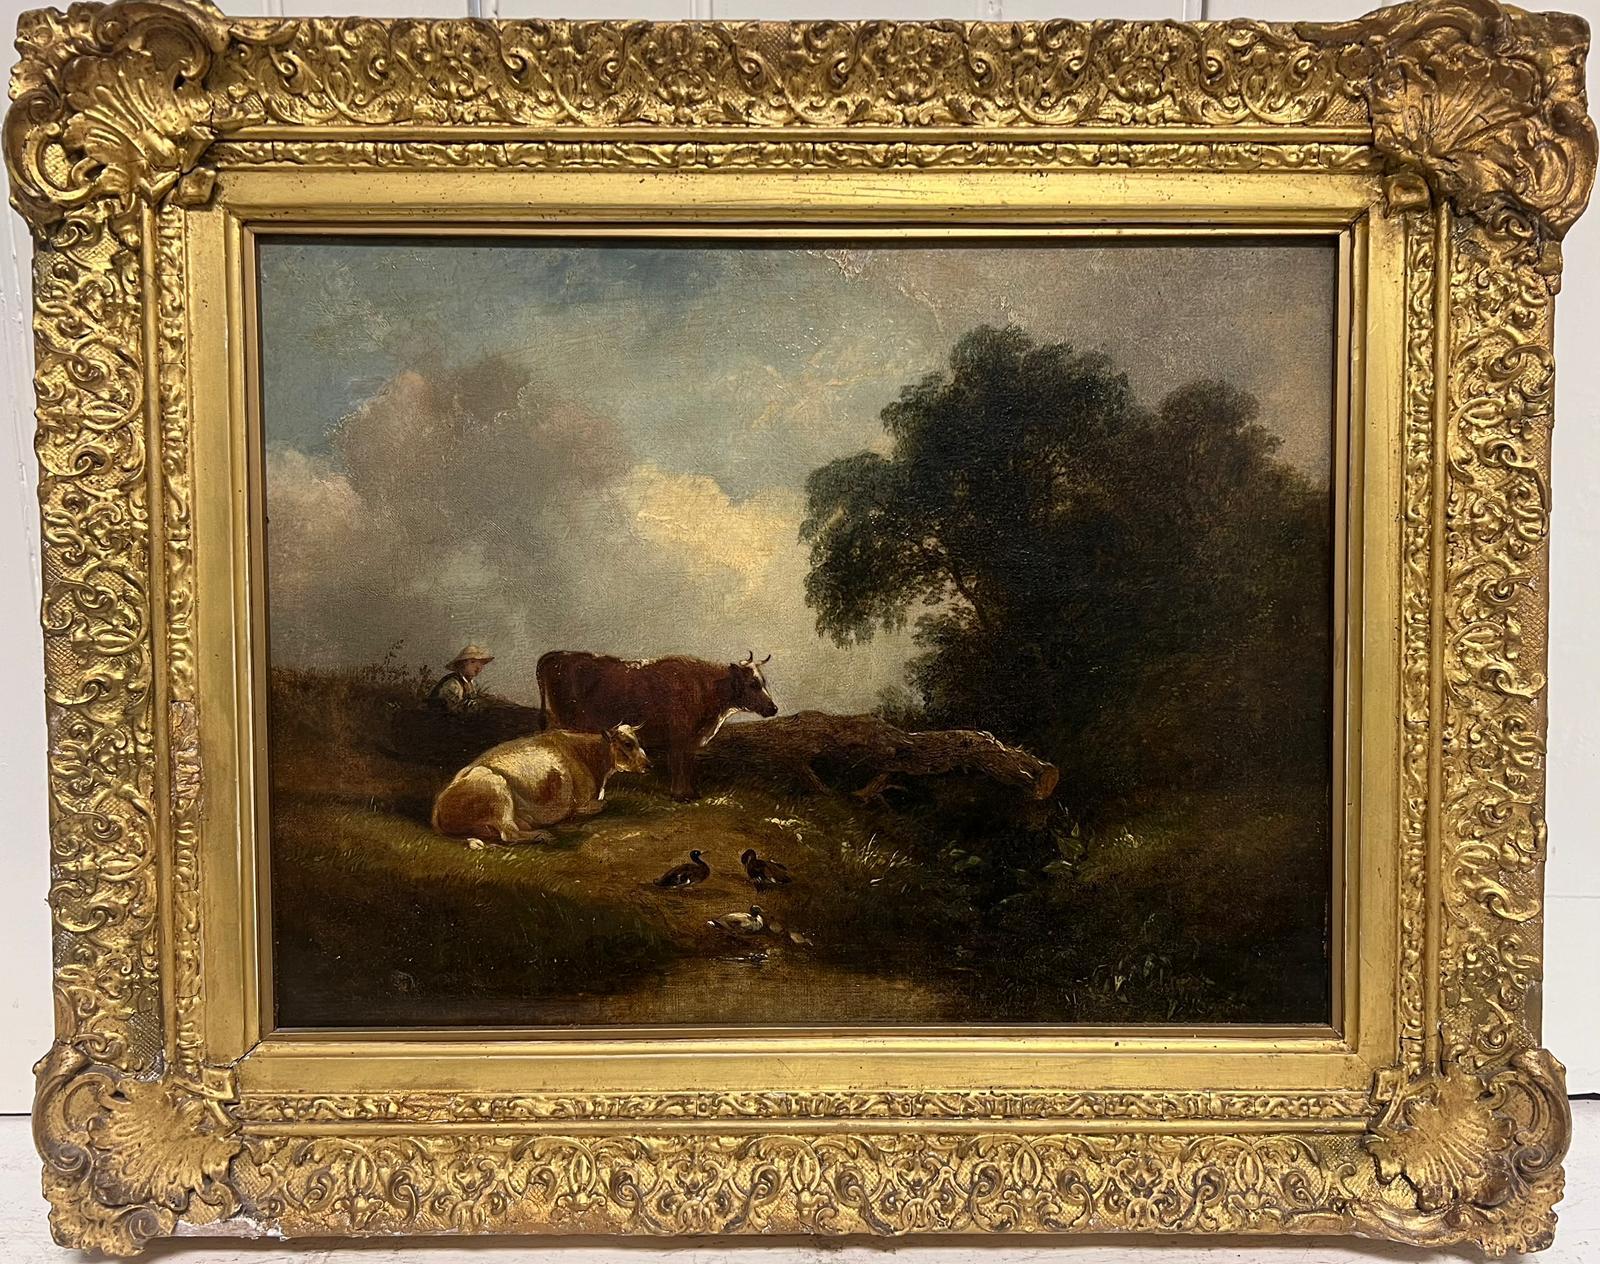 The Close of Day
by George Cole (1810-1883) *see below
oil on canvas, framed
framed: 17 x 22 inches
canvas: 12 x 16 inches
inscribed verso
provenance: private collection, UK
condition: very good and sound condition. Please note, the frame is